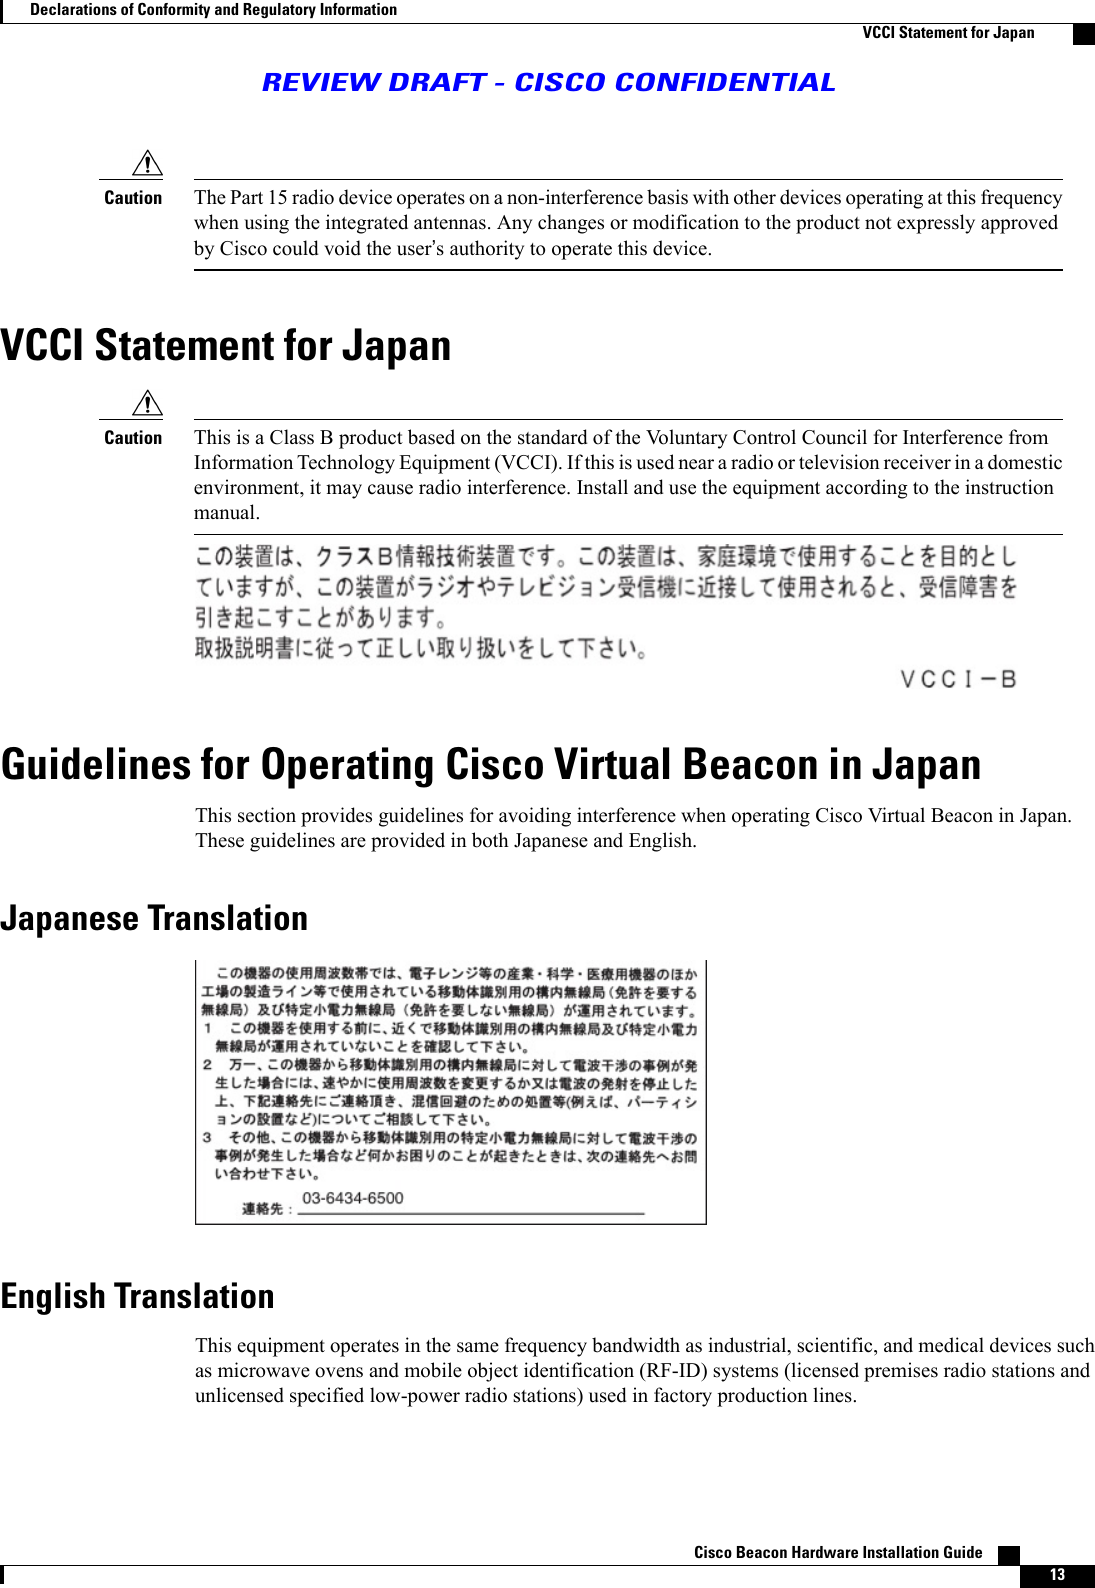 The Part 15 radio device operates on a non-interference basis with other devices operating at this frequencywhen using the integrated antennas. Any changes or modification to the product not expressly approvedby Cisco could void the user’s authority to operate this device.CautionVCCI Statement for JapanThis is a Class B product based on the standard of the Voluntary Control Council for Interference fromInformation Technology Equipment (VCCI). If this is used near a radio or television receiver in a domesticenvironment, it may cause radio interference. Install and use the equipment according to the instructionmanual.CautionGuidelines for Operating Cisco Virtual Beacon in JapanThis section provides guidelines for avoiding interference when operating Cisco Virtual Beacon in Japan.These guidelines are provided in both Japanese and English.Japanese TranslationEnglish TranslationThis equipment operates in the same frequency bandwidth as industrial, scientific, and medical devices suchas microwave ovens and mobile object identification (RF-ID) systems (licensed premises radio stations andunlicensed specified low-power radio stations) used in factory production lines.Cisco Beacon Hardware Installation Guide    13Declarations of Conformity and Regulatory InformationVCCI Statement for JapanREVIEW DRAFT - CISCO CONFIDENTIAL